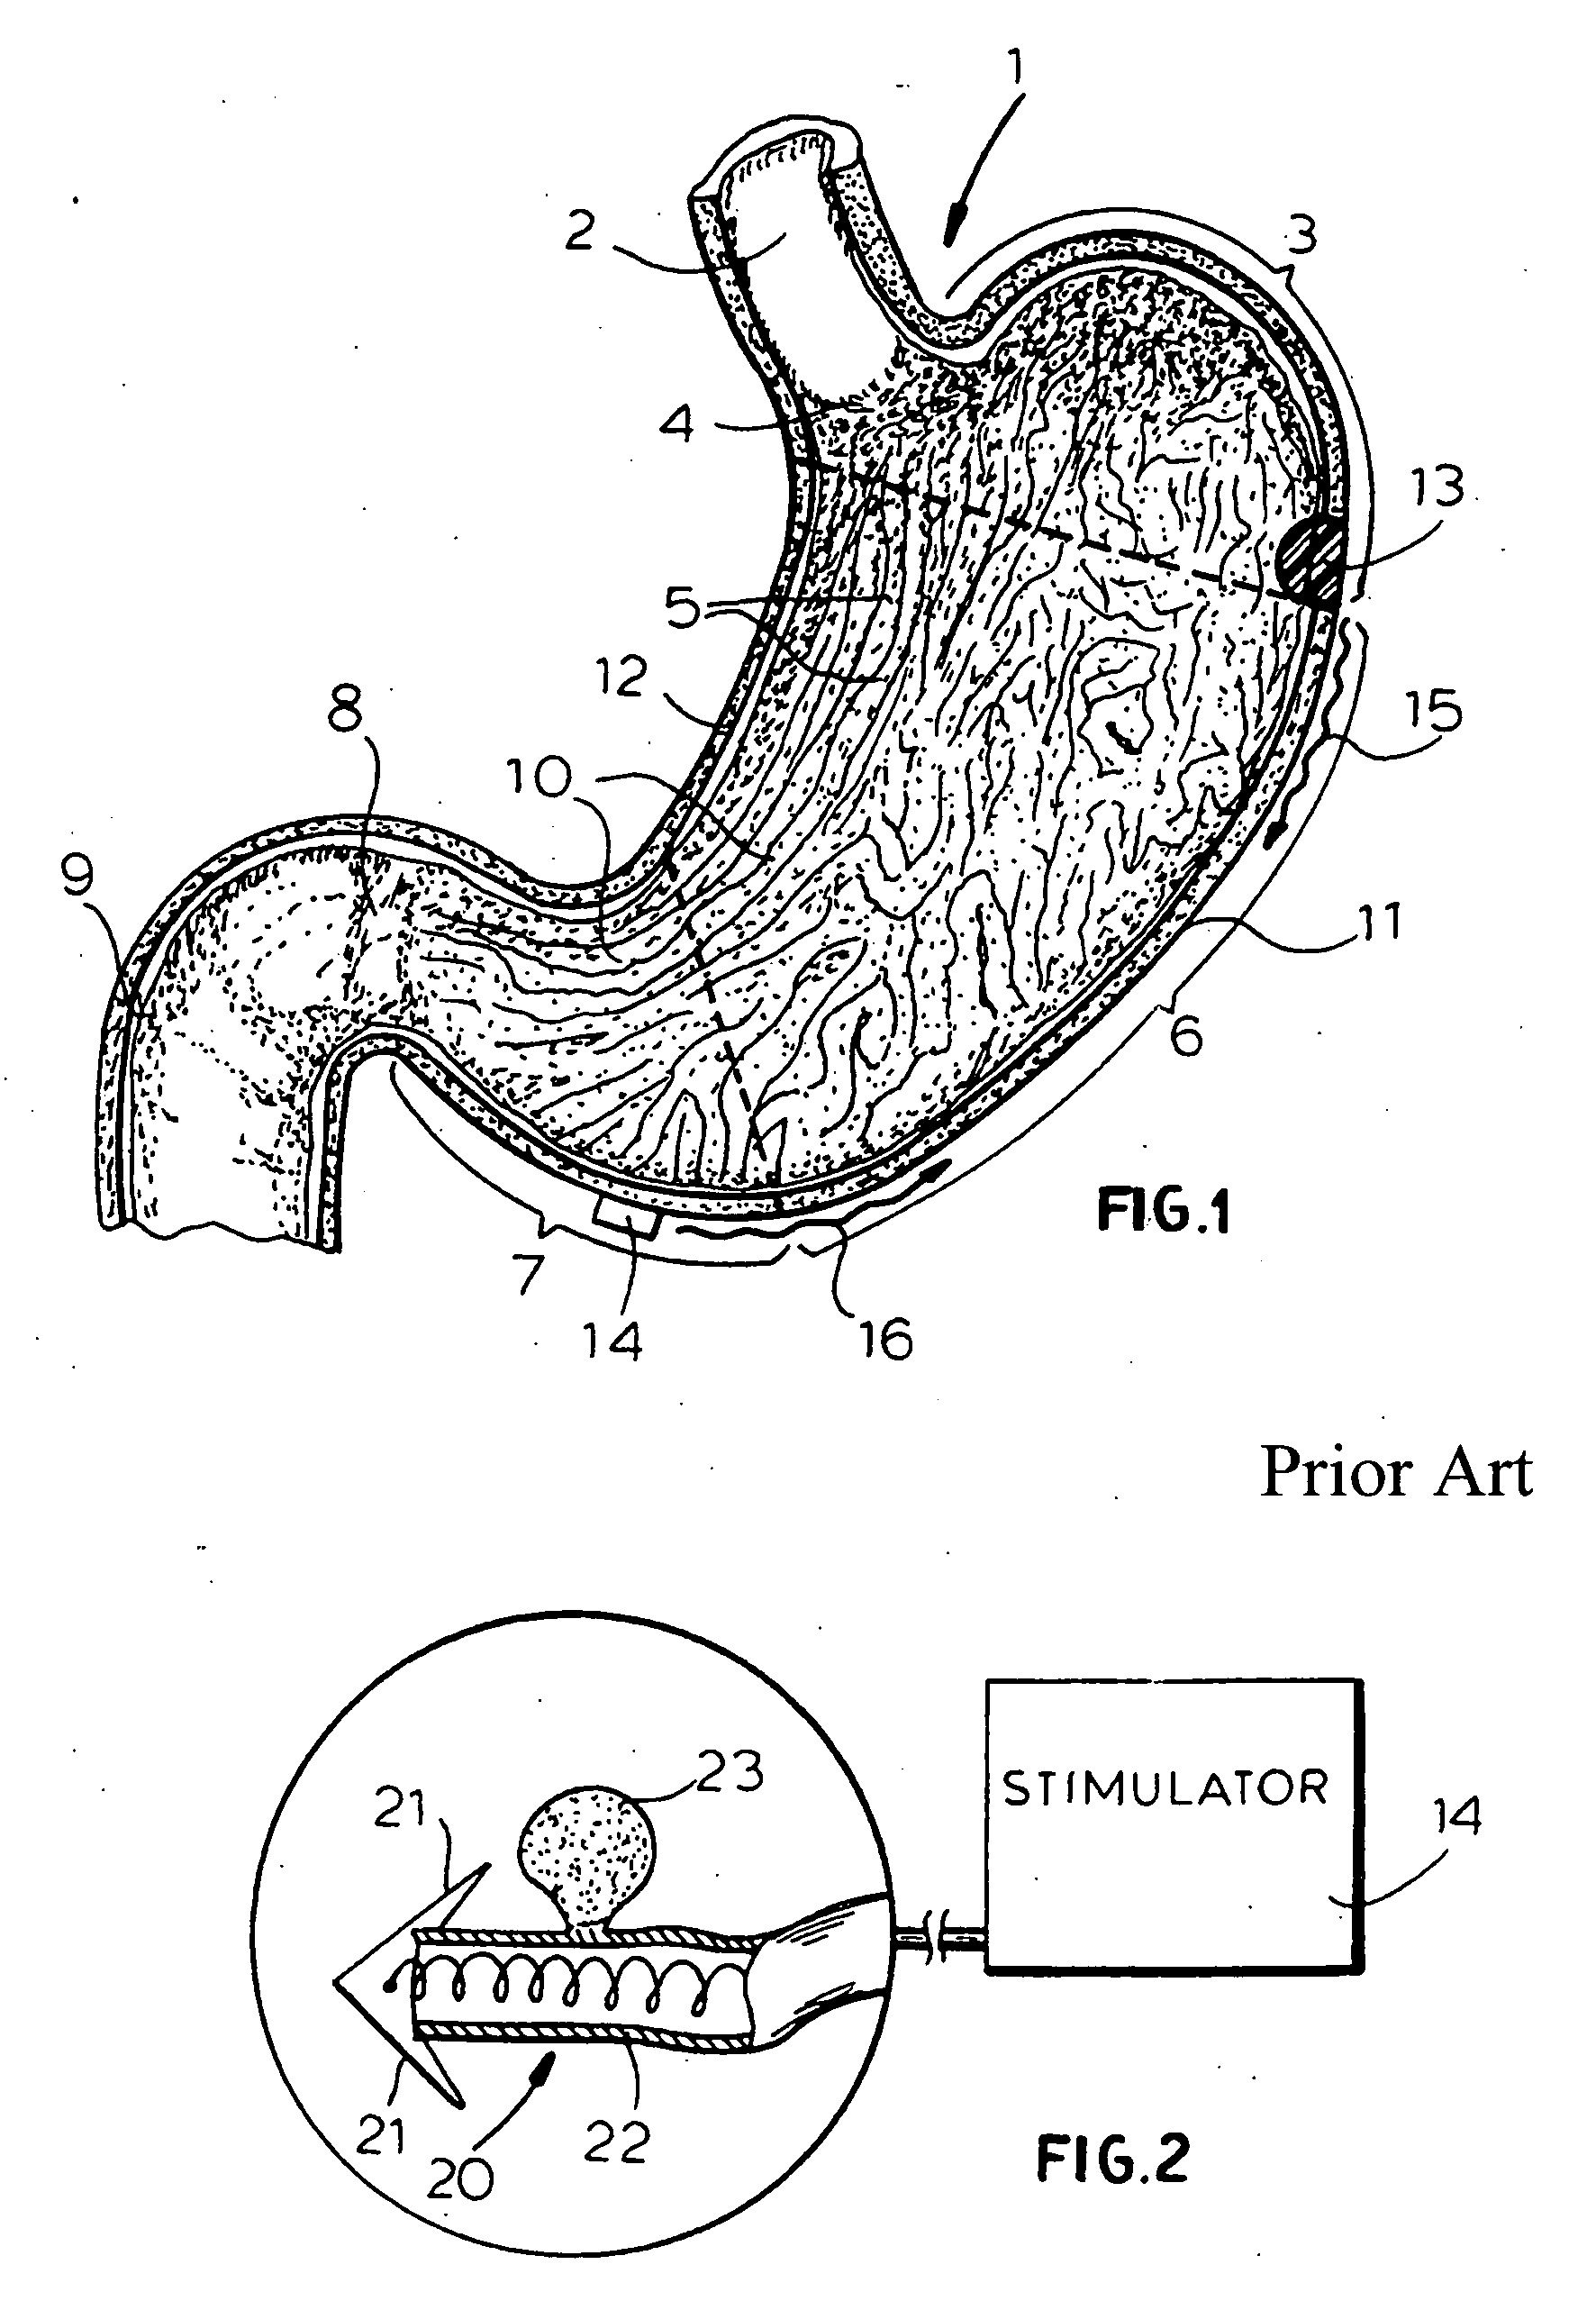 Method and device for treating obesity by suppressing appetite and hunger using vibration